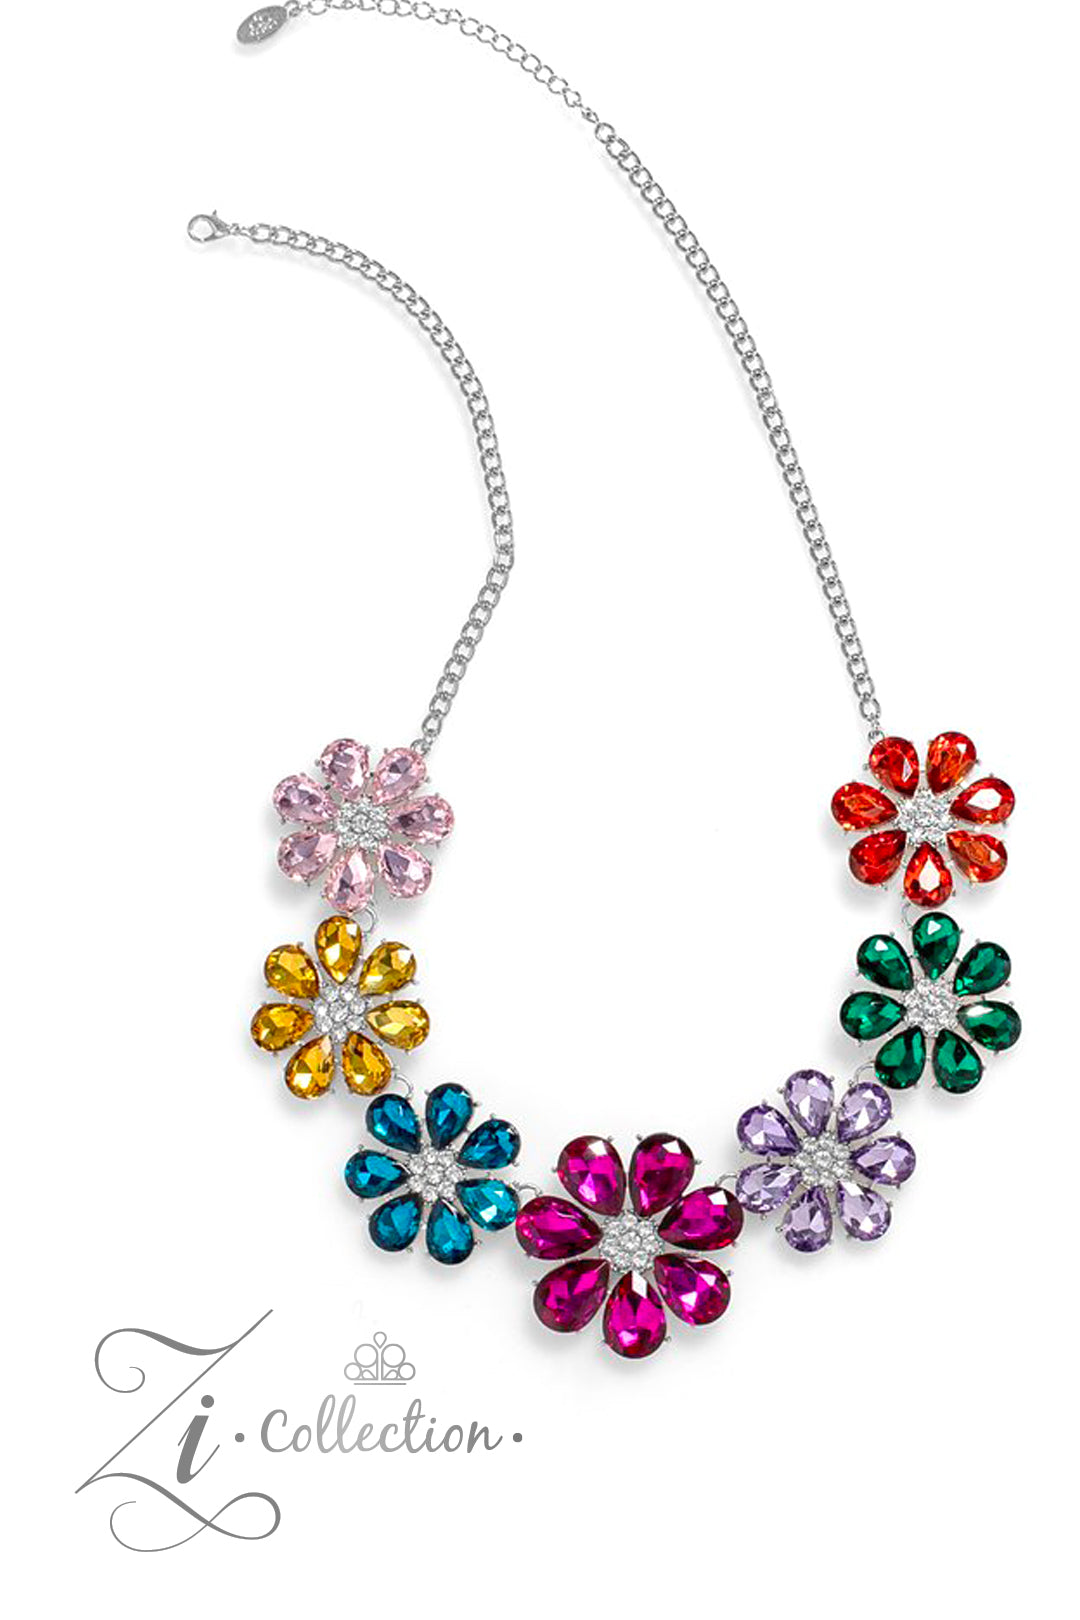 <p data-mce-fragment="1">Colorful teardrop-shaped petals fan out around clusters of corrugated sparkle, blossoming into an enchanted kaleidoscope. The faceted surfaces of each petal add texture and depth, allowing the floral frames to pop with 3D detail and further highlight the spectrum of color at play. Features an adjustable clasp closure.</p> <p data-mce-fragment="1"><i data-mce-fragment="1">Sold as one individual necklace. Includes one pair of matching earrings.</i></p>